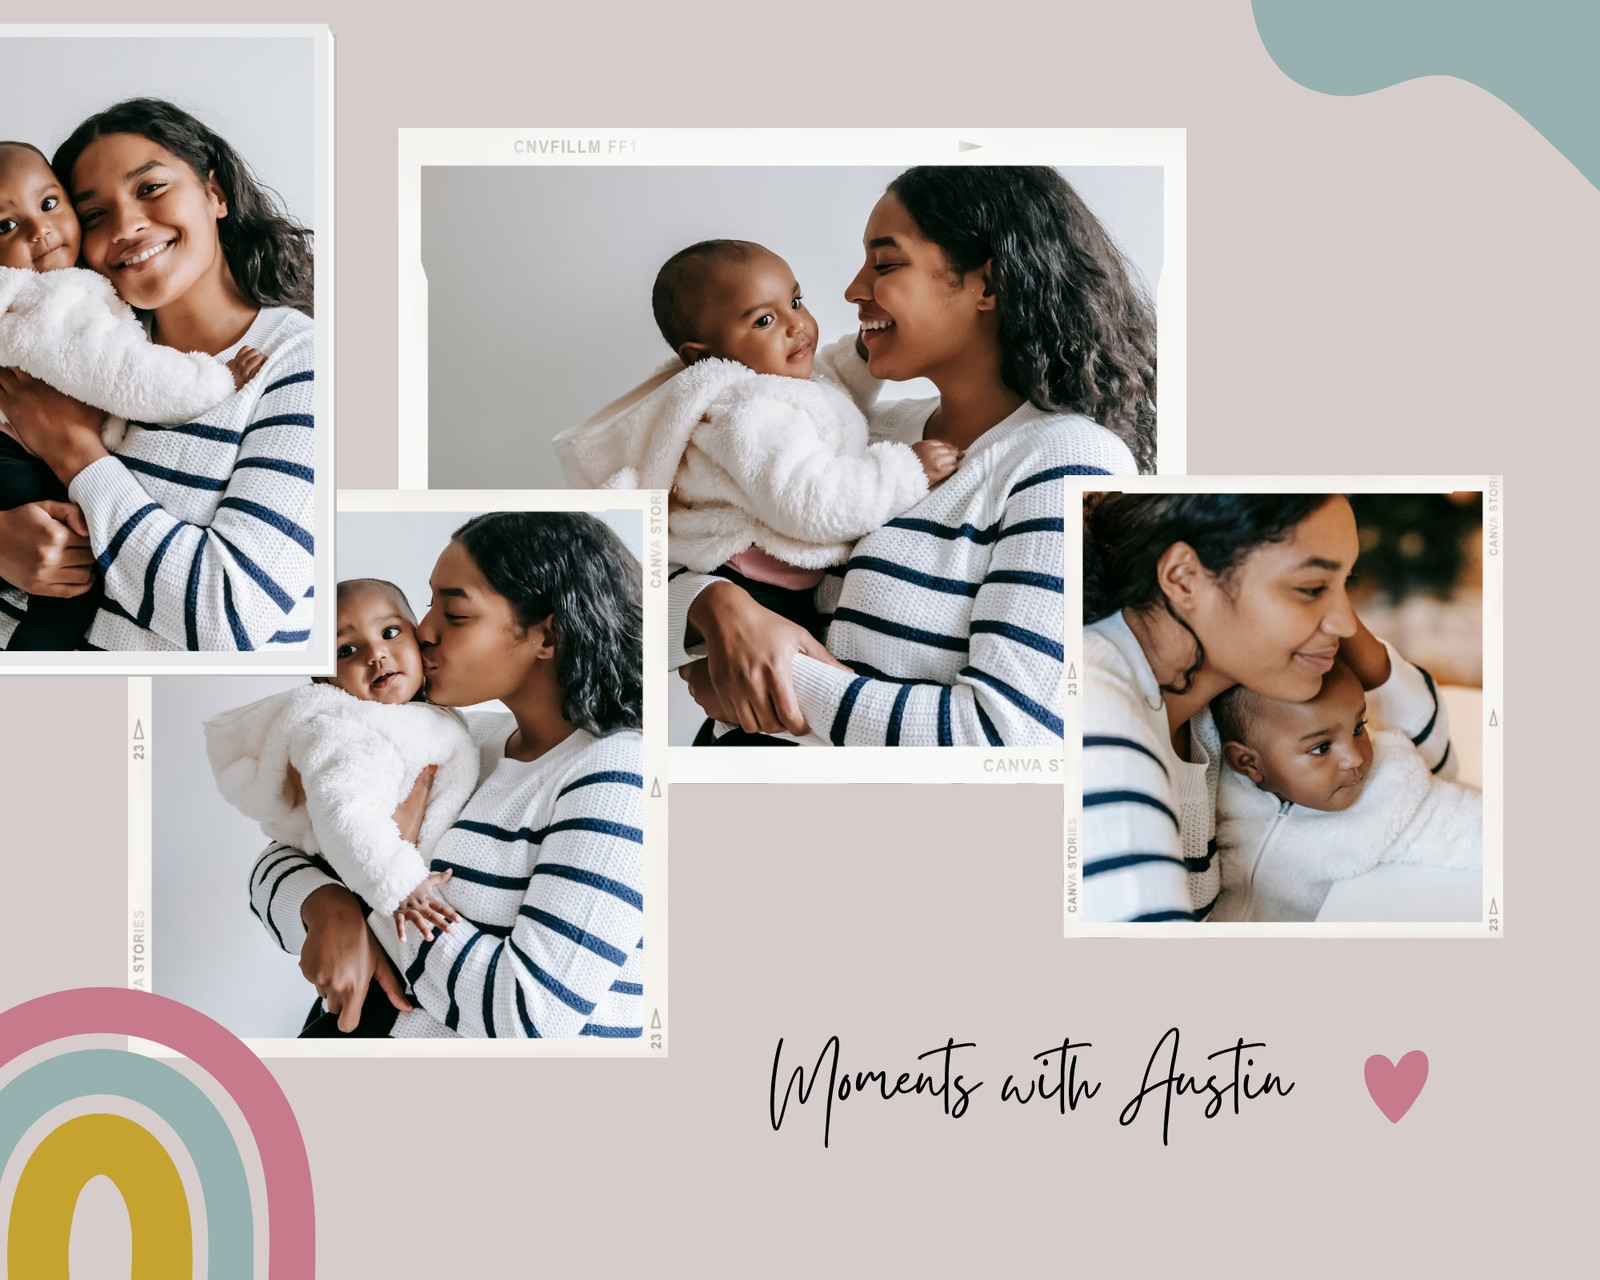 https://marketplace.canva.com/EAFIwnVy3xw/1/0/1600w/canva-pink-and-green-rainbow-simple-photos-mother-and-baby-photo-collage-3DulgQ4JN0Q.jpg